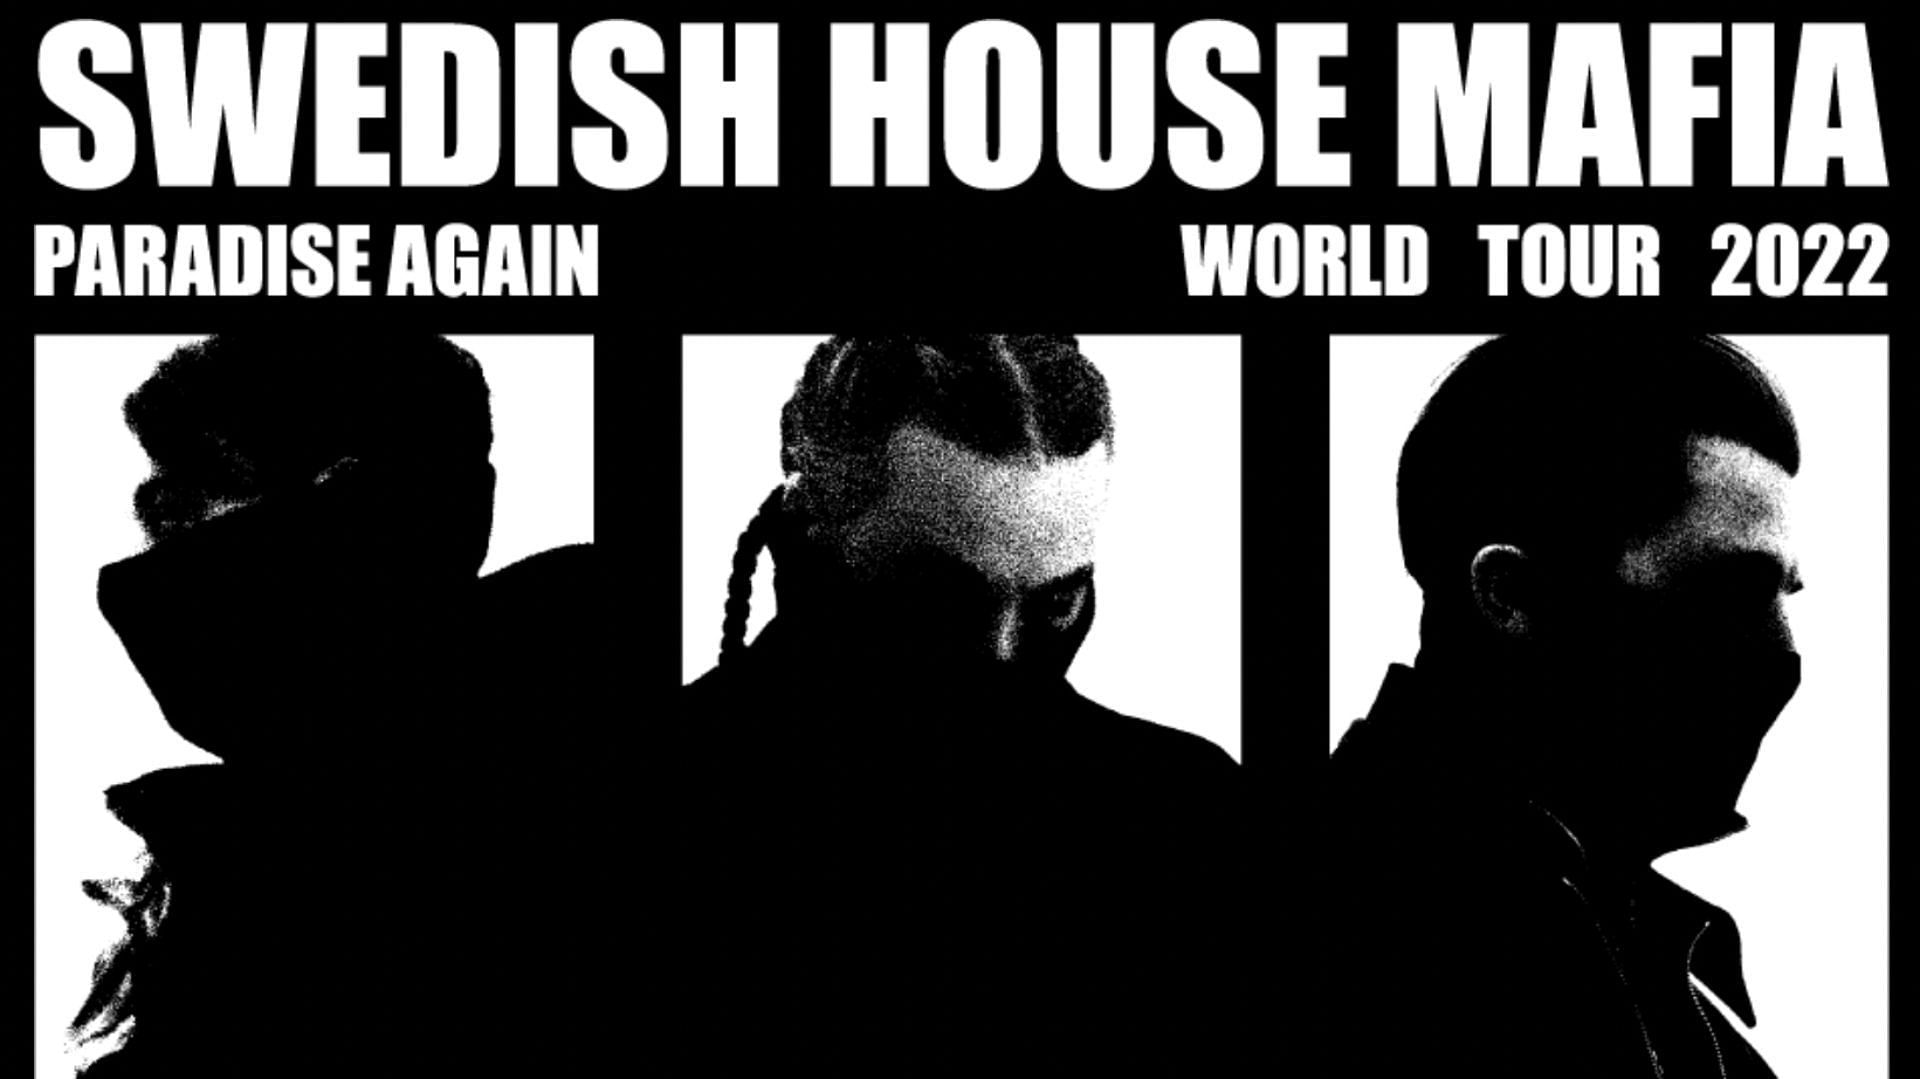 Swedish House Mafia Tour 2022 Dates, venue, tickets, and other details